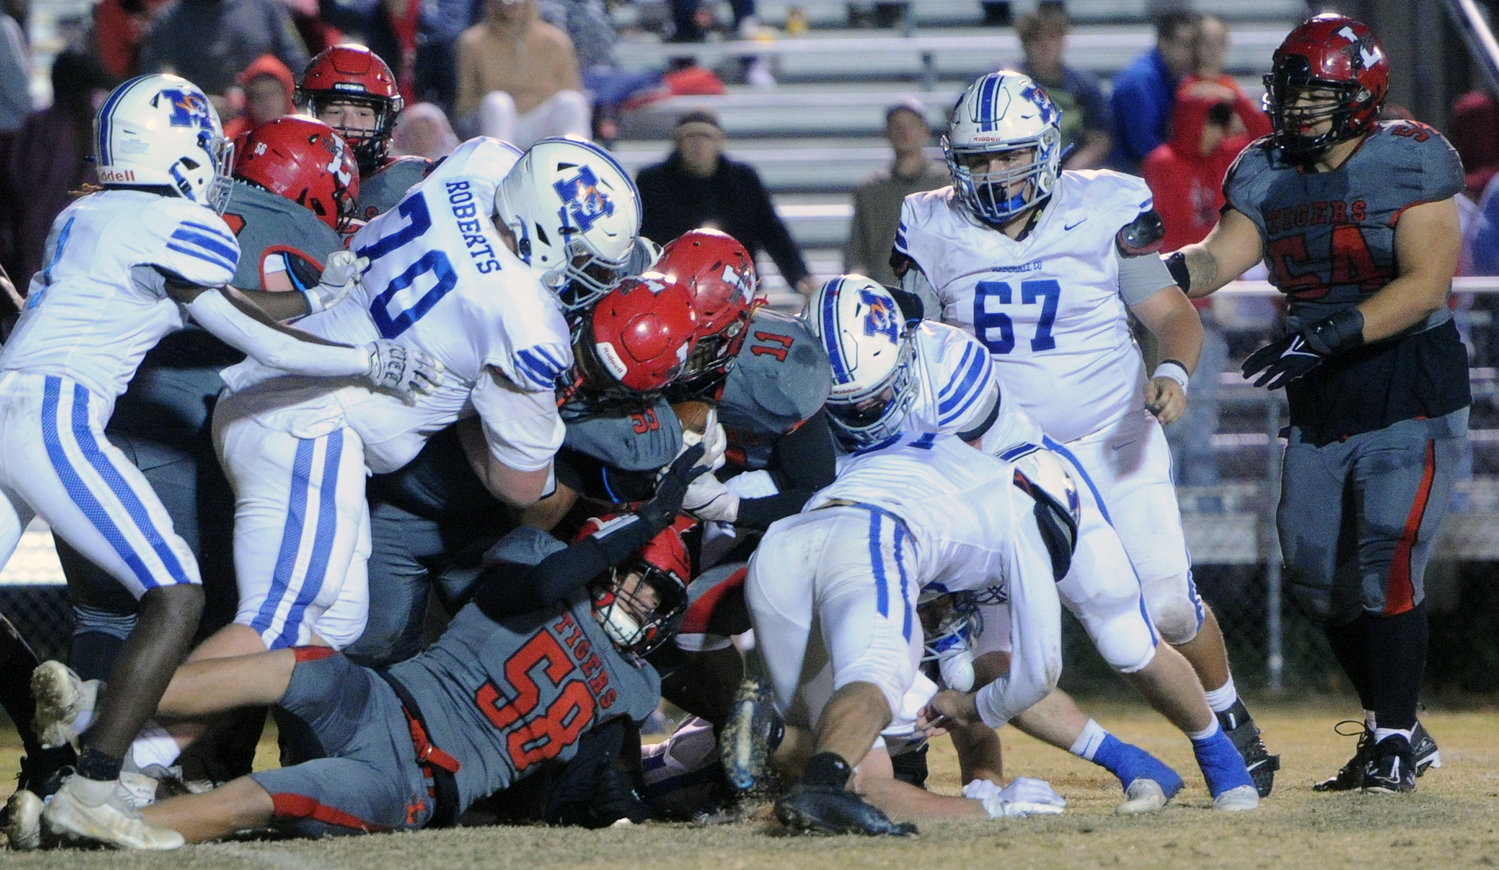 A host of Marshall County defenders jump on the pile to bring down talented Lexington quarterback Isiah McClaine.